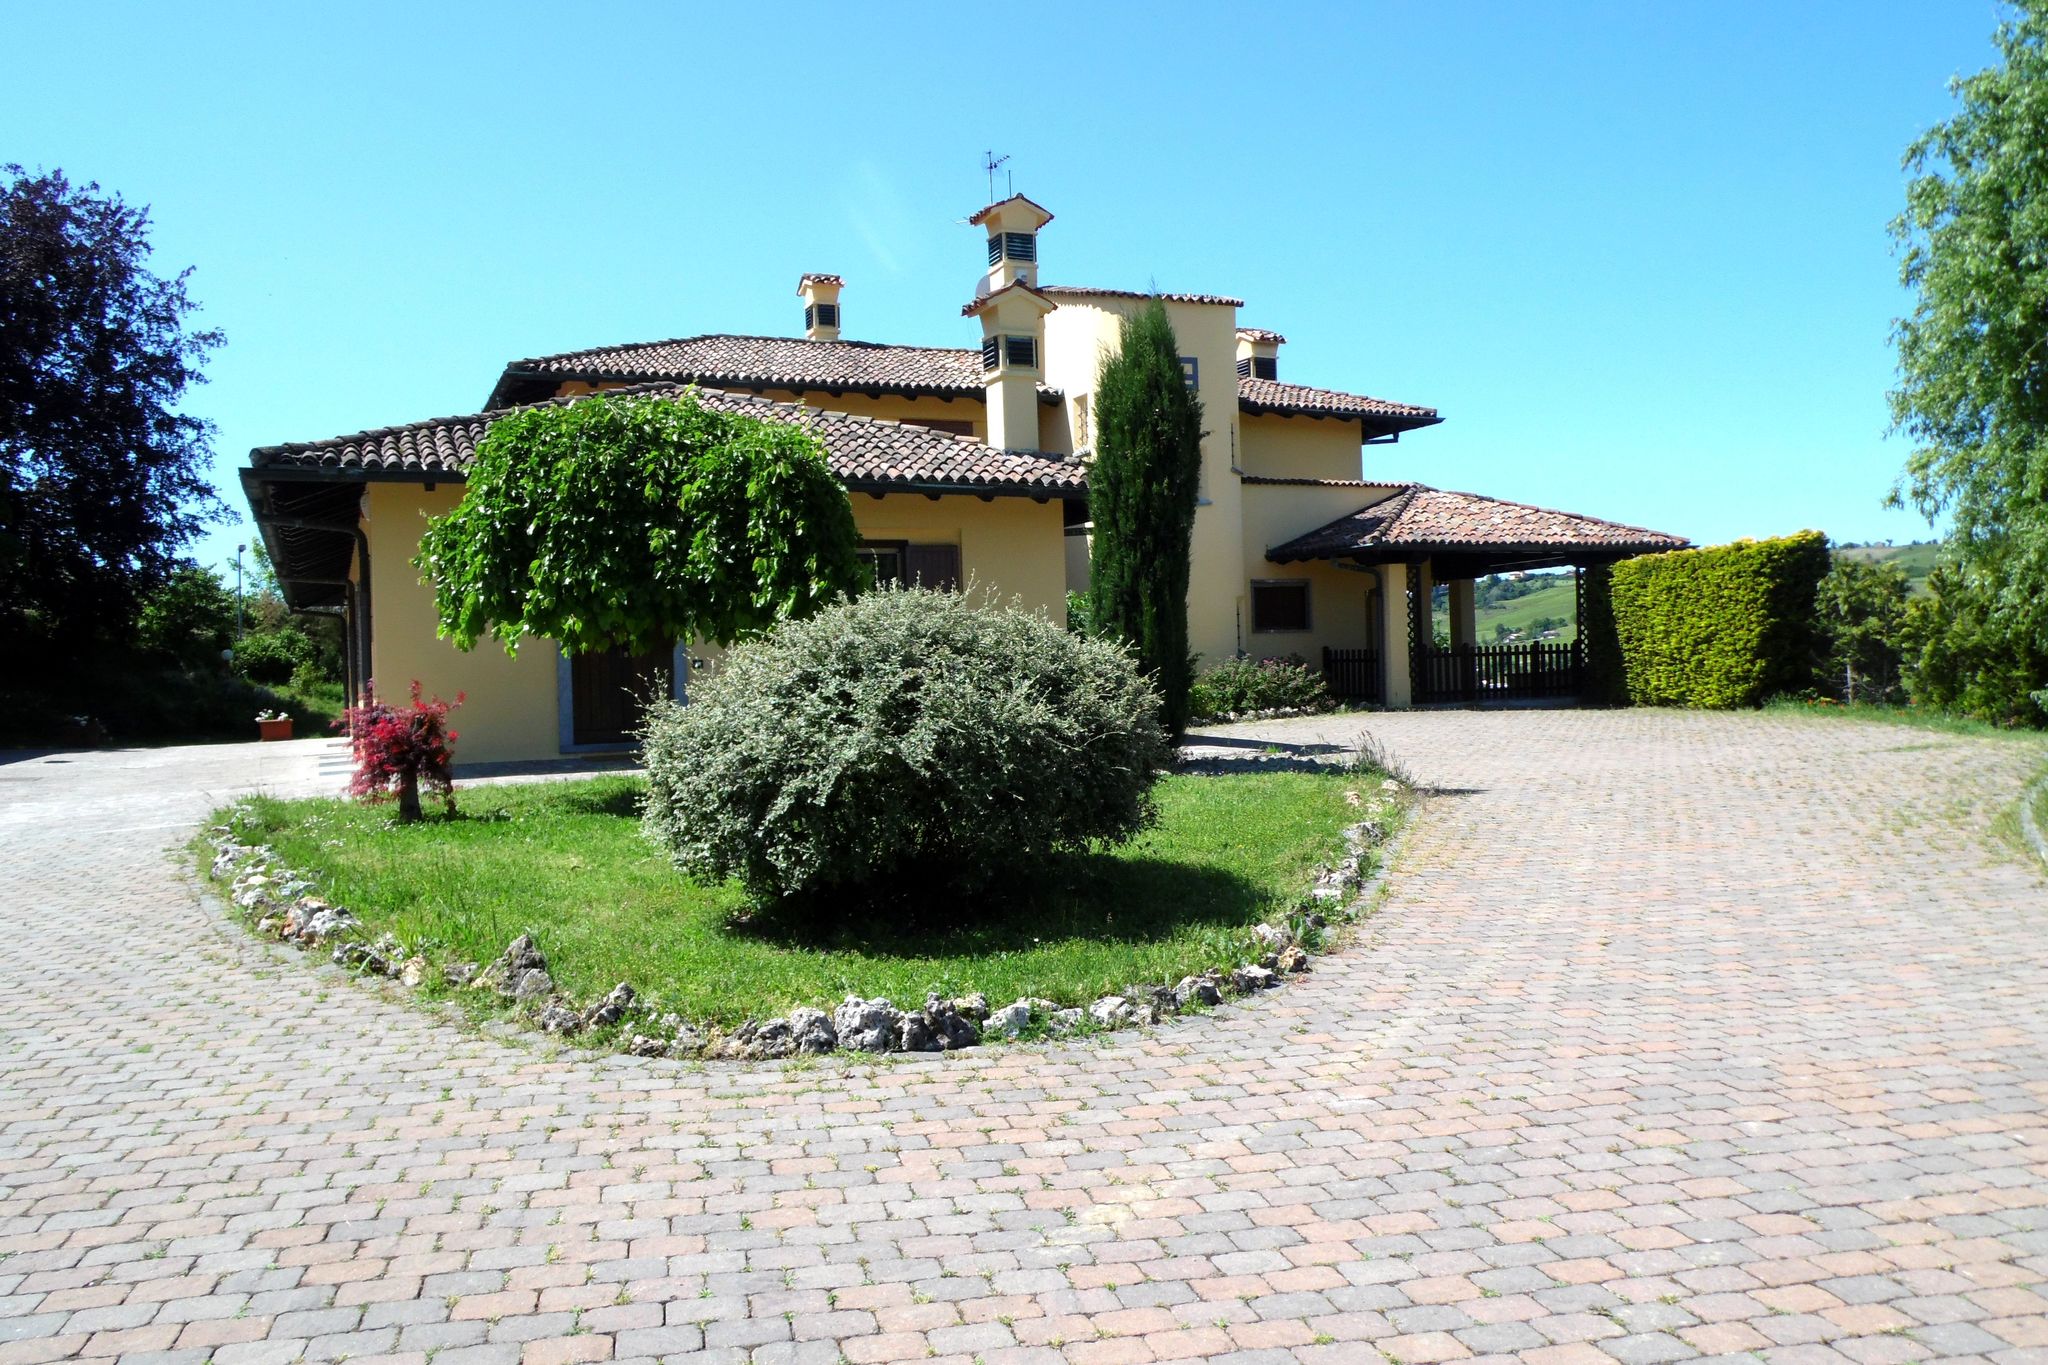 Detached villa with pool within a farm ground, in quiet hillside